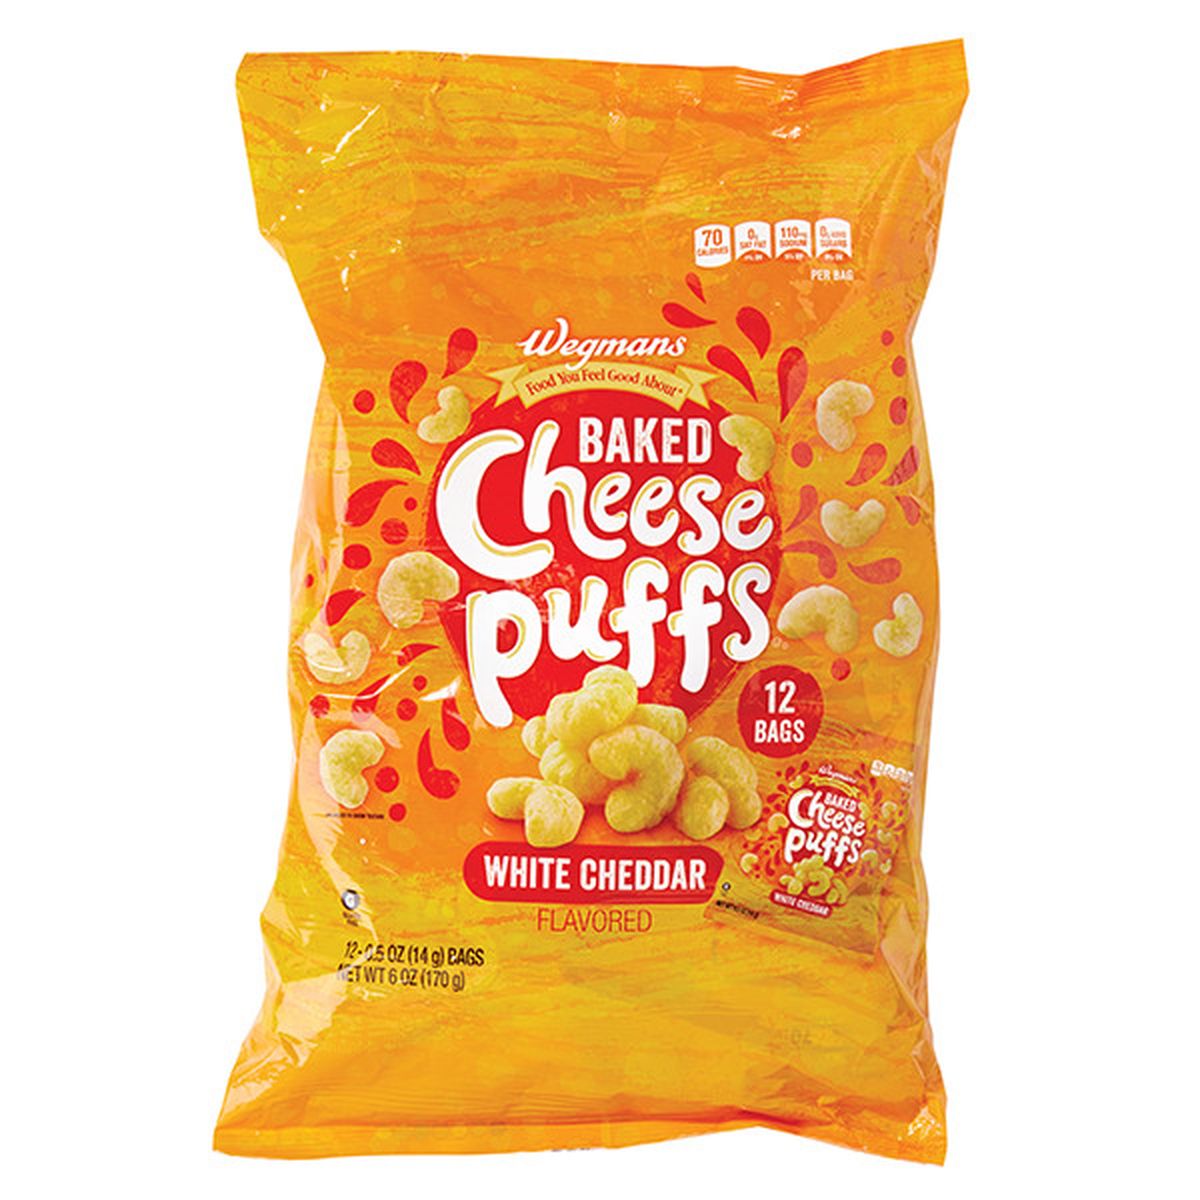 Calories in Wegmans Baked Cheese Puffs, White Cheddar Flavored, 12 Bags